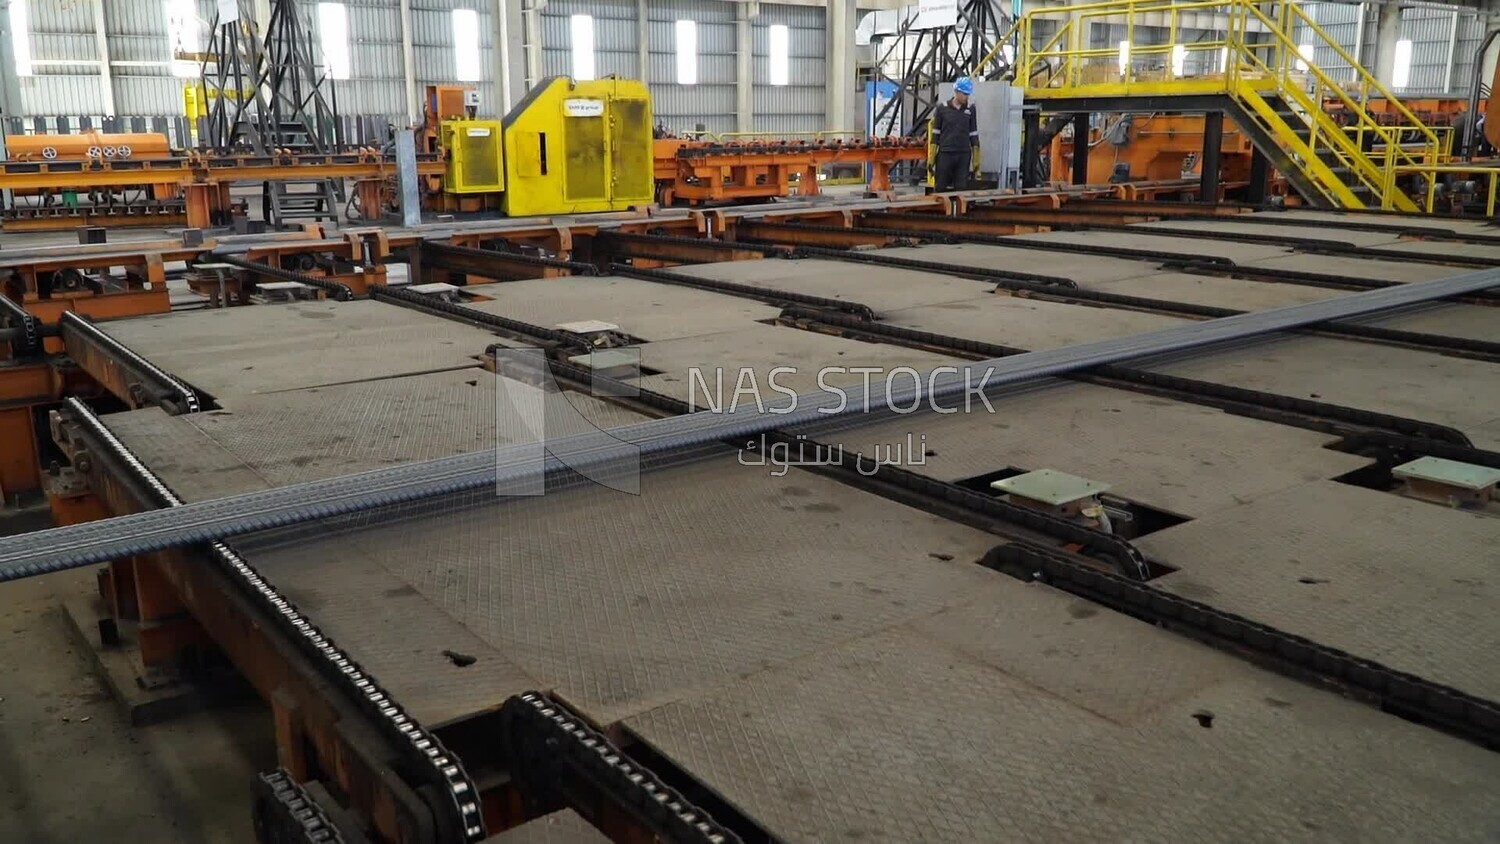 Concrete bars on the conveyor belt in the iron and steel factory